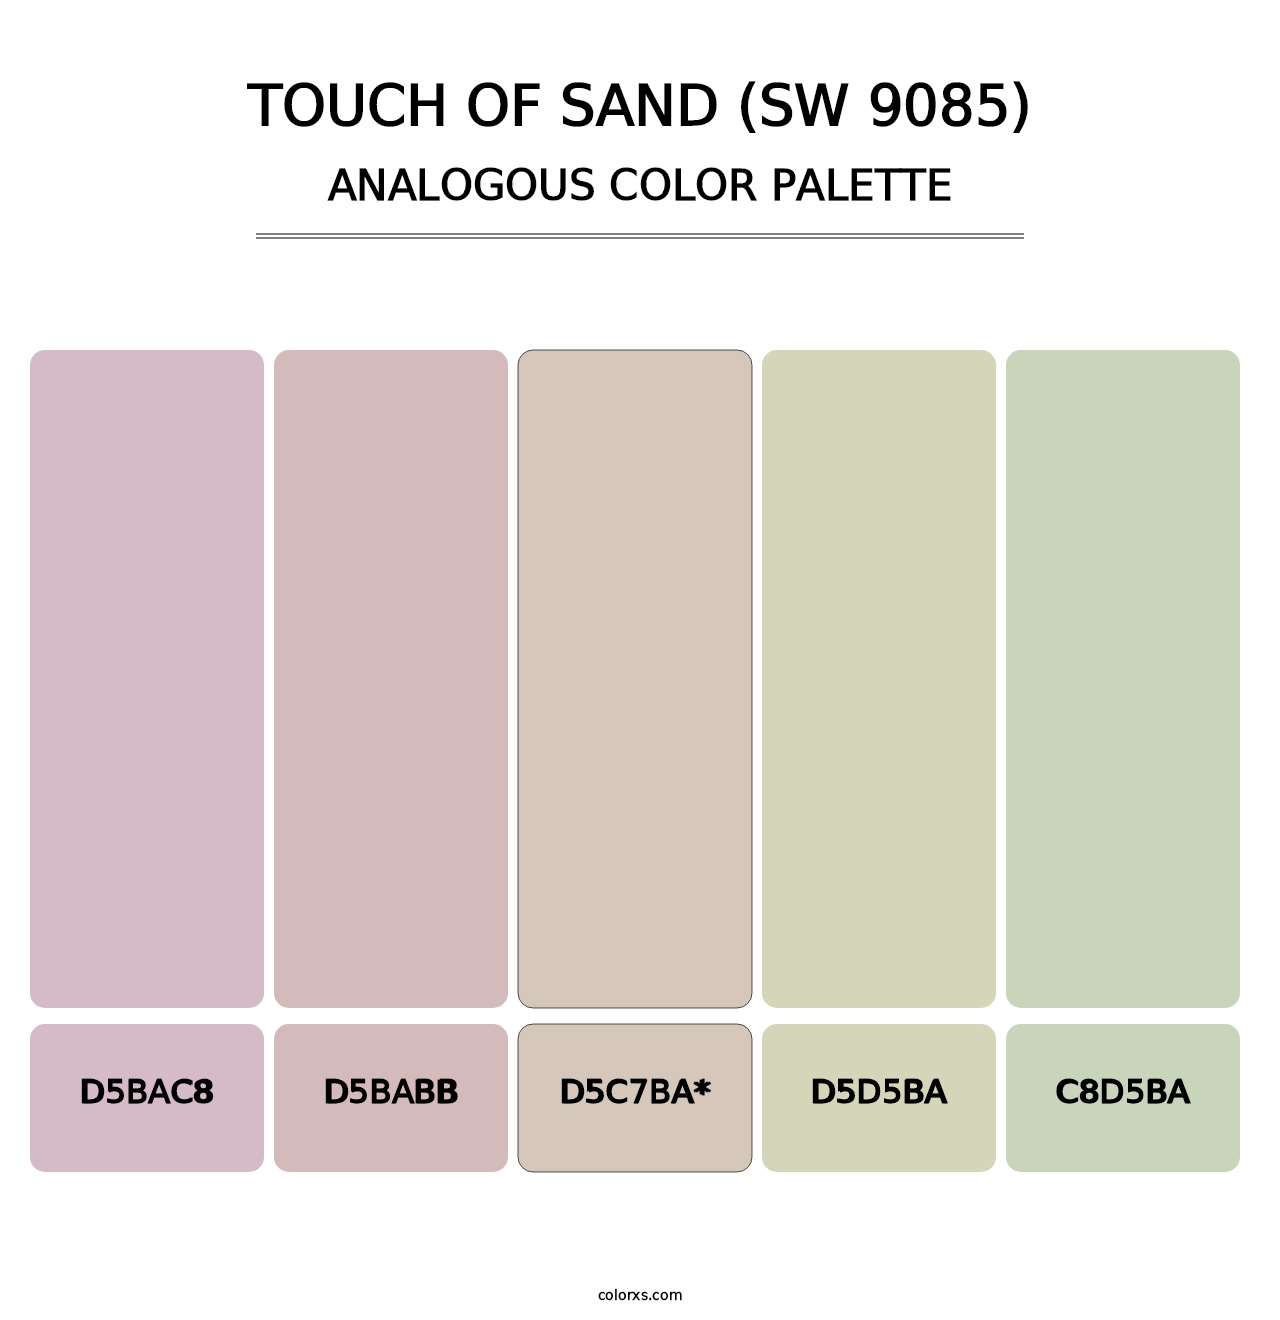 Touch of Sand (SW 9085) - Analogous Color Palette